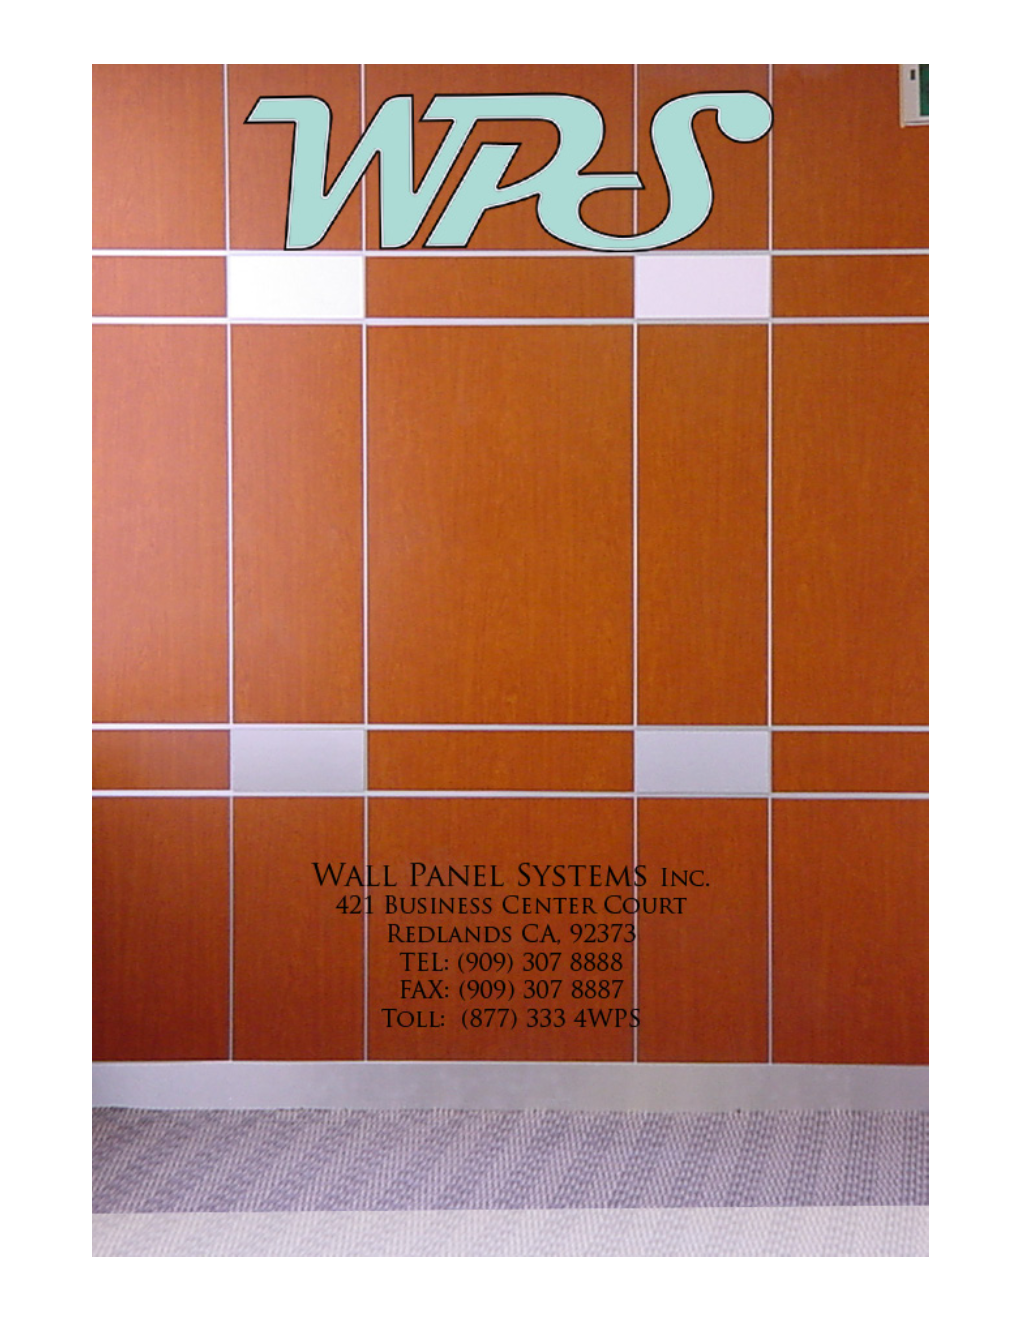 Wall Panel Systems, Inc